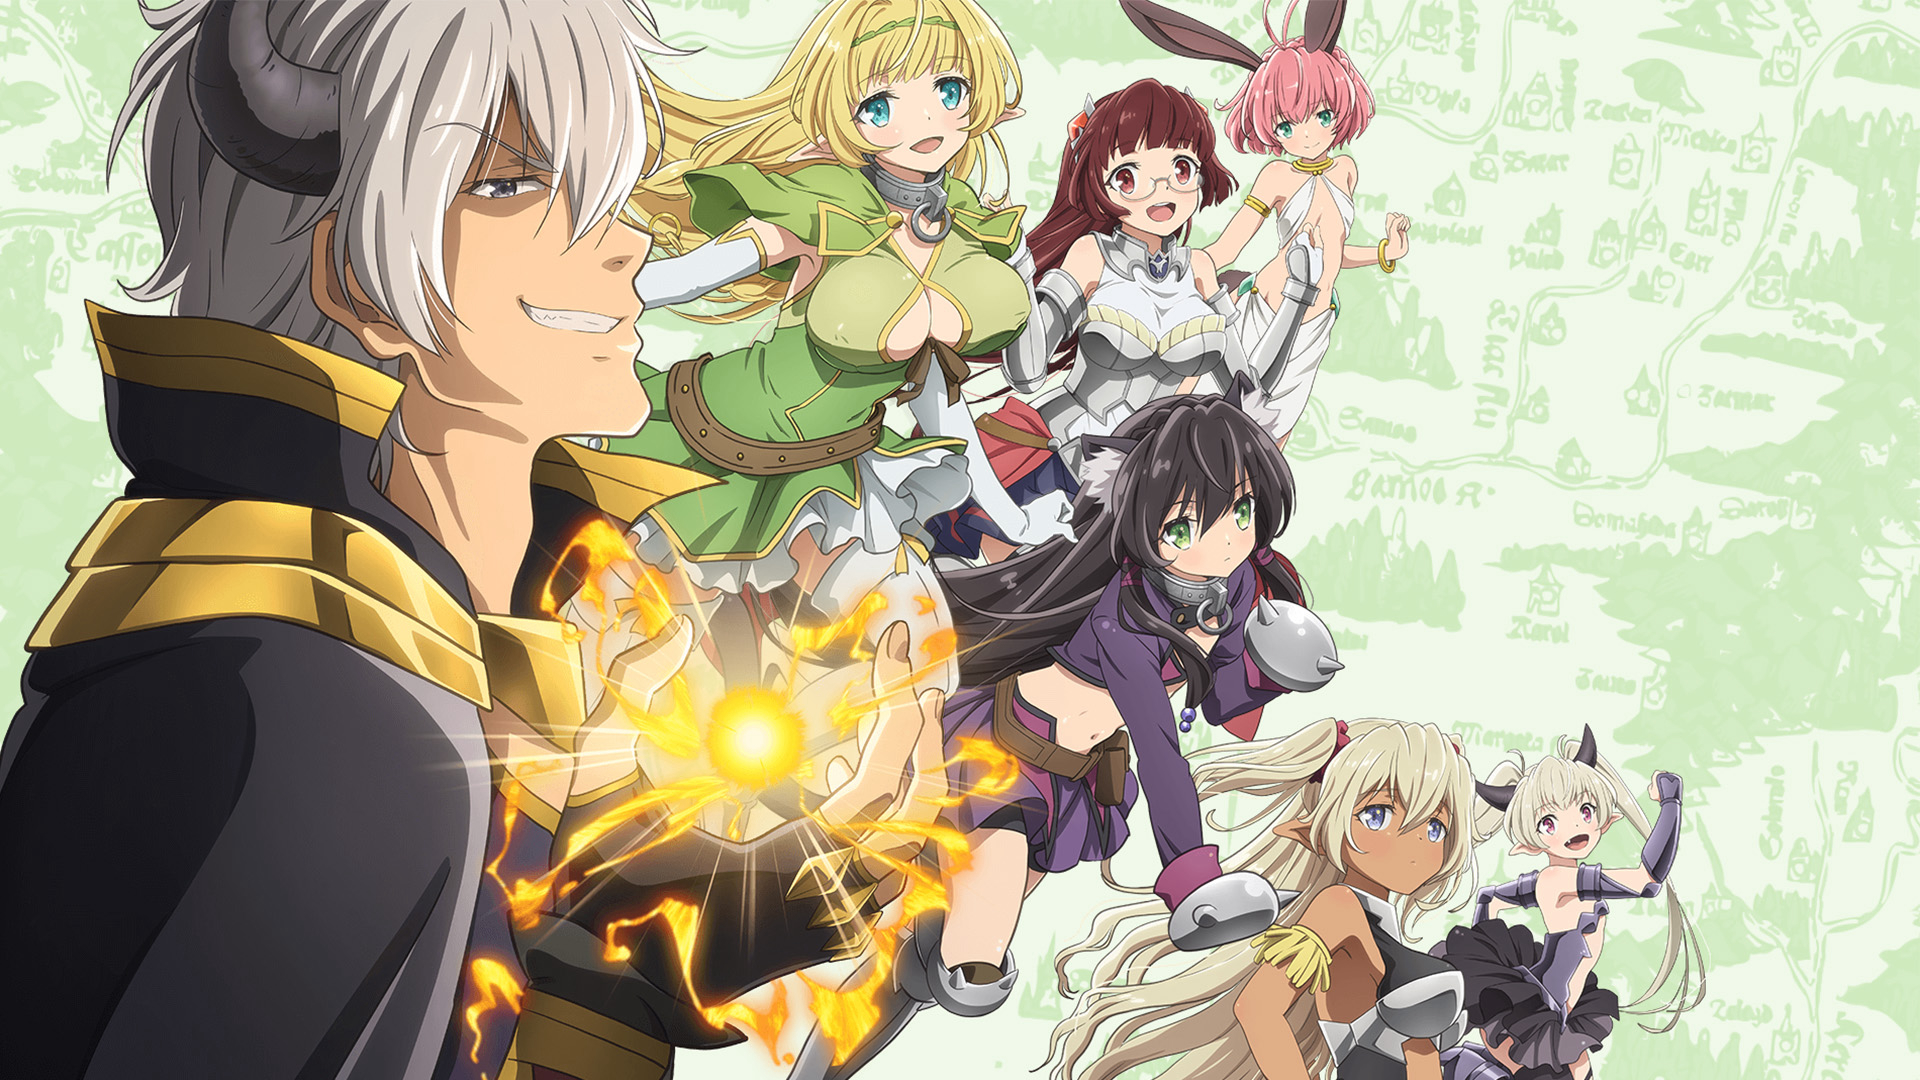 Isekai Maou to Shoukan Shoujo no Dorei Majutsu, How Not to Summon a Demon Lord, The Otherworldly Demon King and the Summoner Girls' Slave Magic / Isekai Maou to Shoukan Shoujo no Dorei Majutsu, How Not to Summon a Demon Lord, The Otherworldly Demon King and the Summoner Girls' Slave Magic (2018)